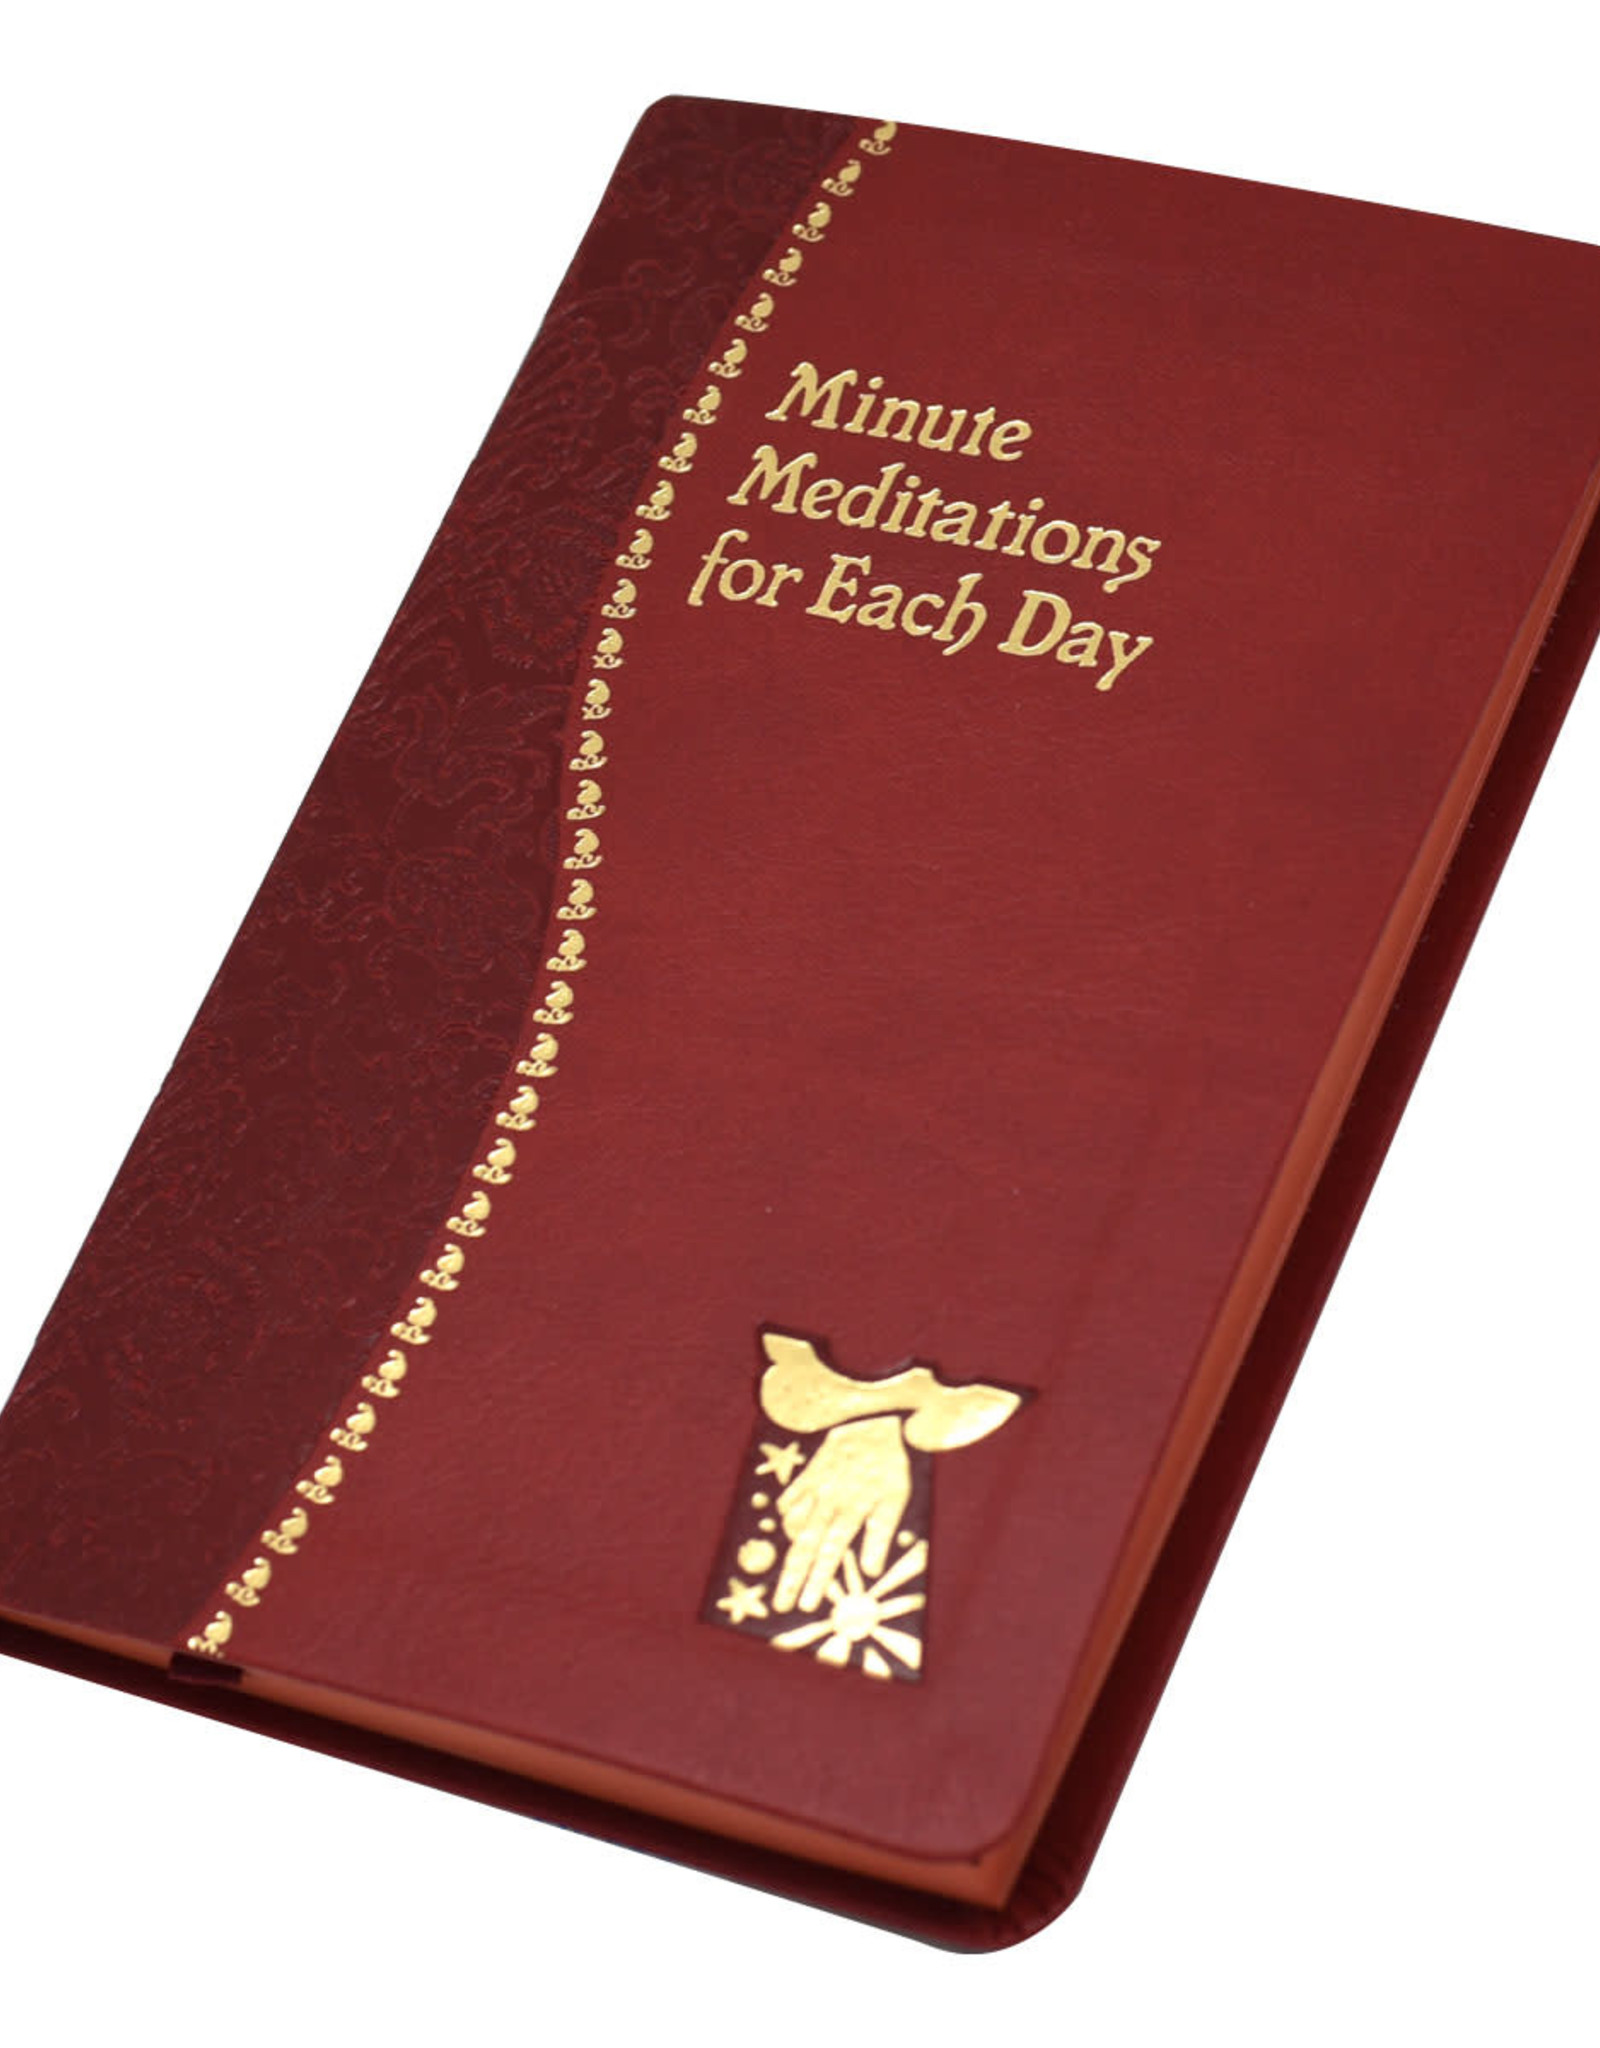 Catholic Book Publishing Minute Meditations for Each Day, by Rev. Bede Naegele